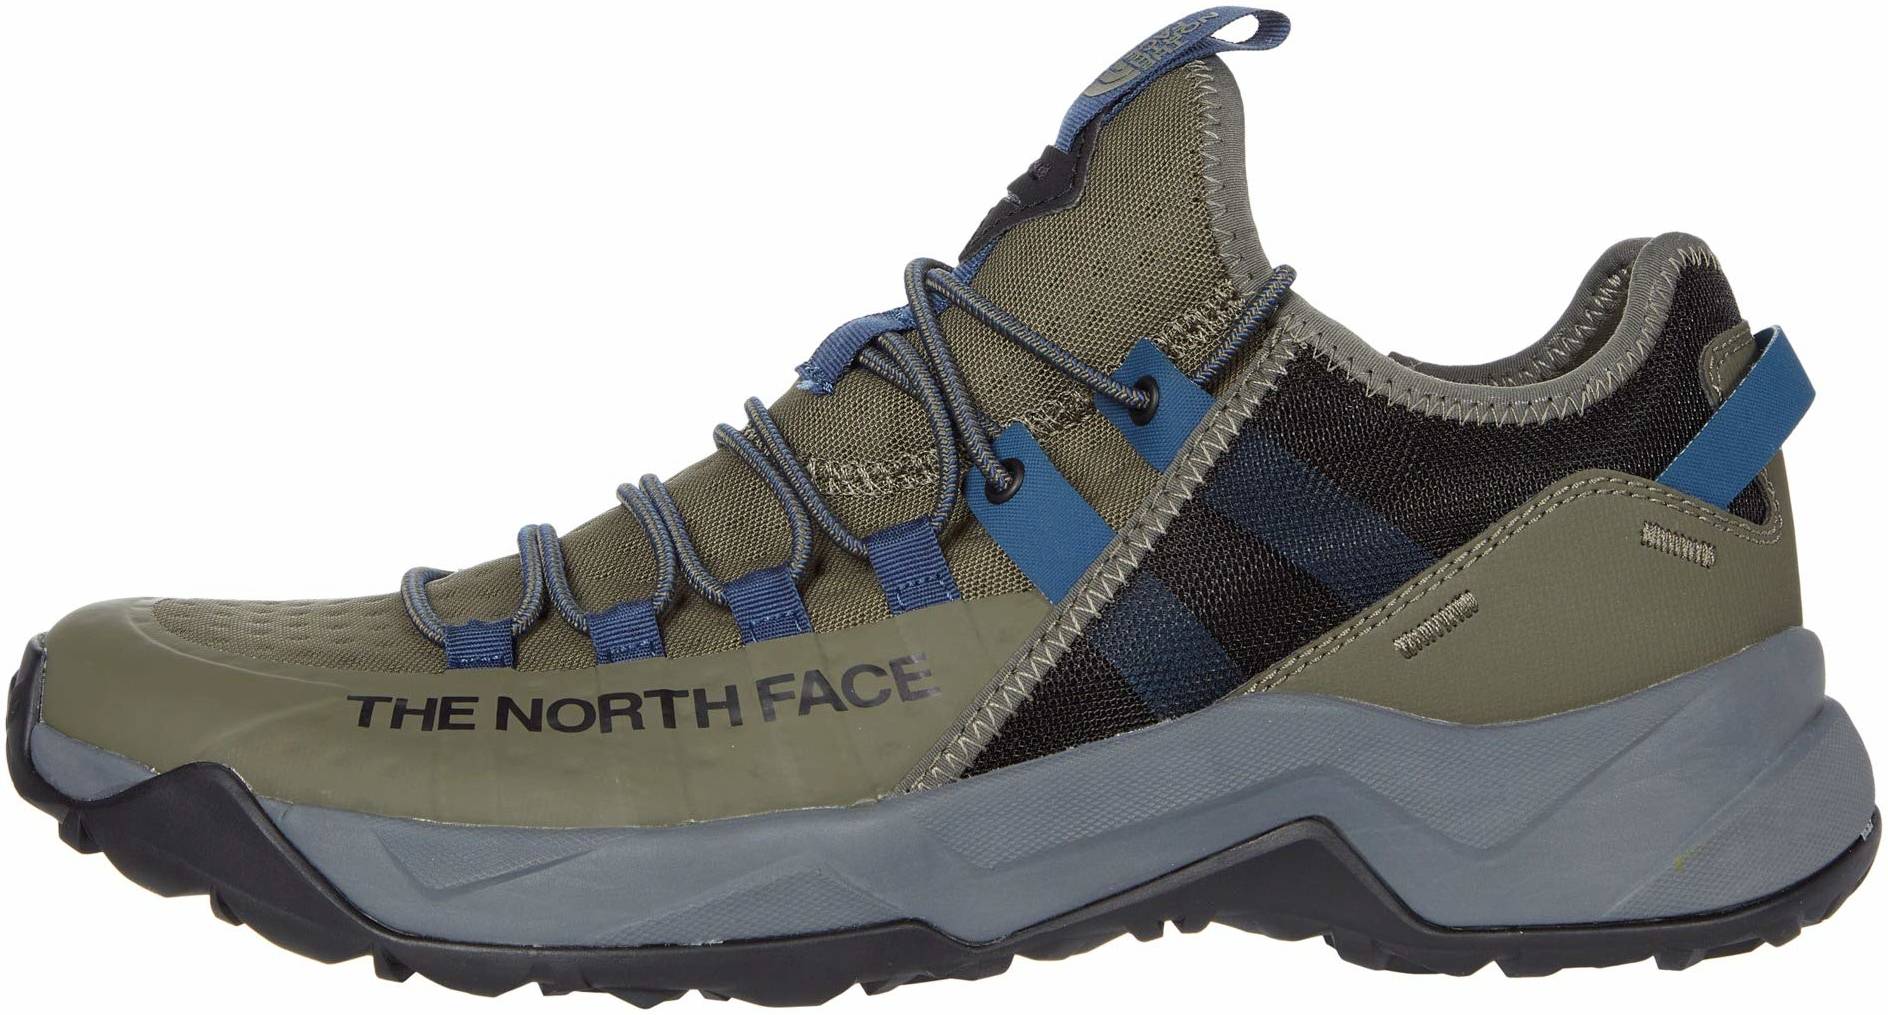 10+ The North Face hiking shoes: Save up to 51% | RunRepeat